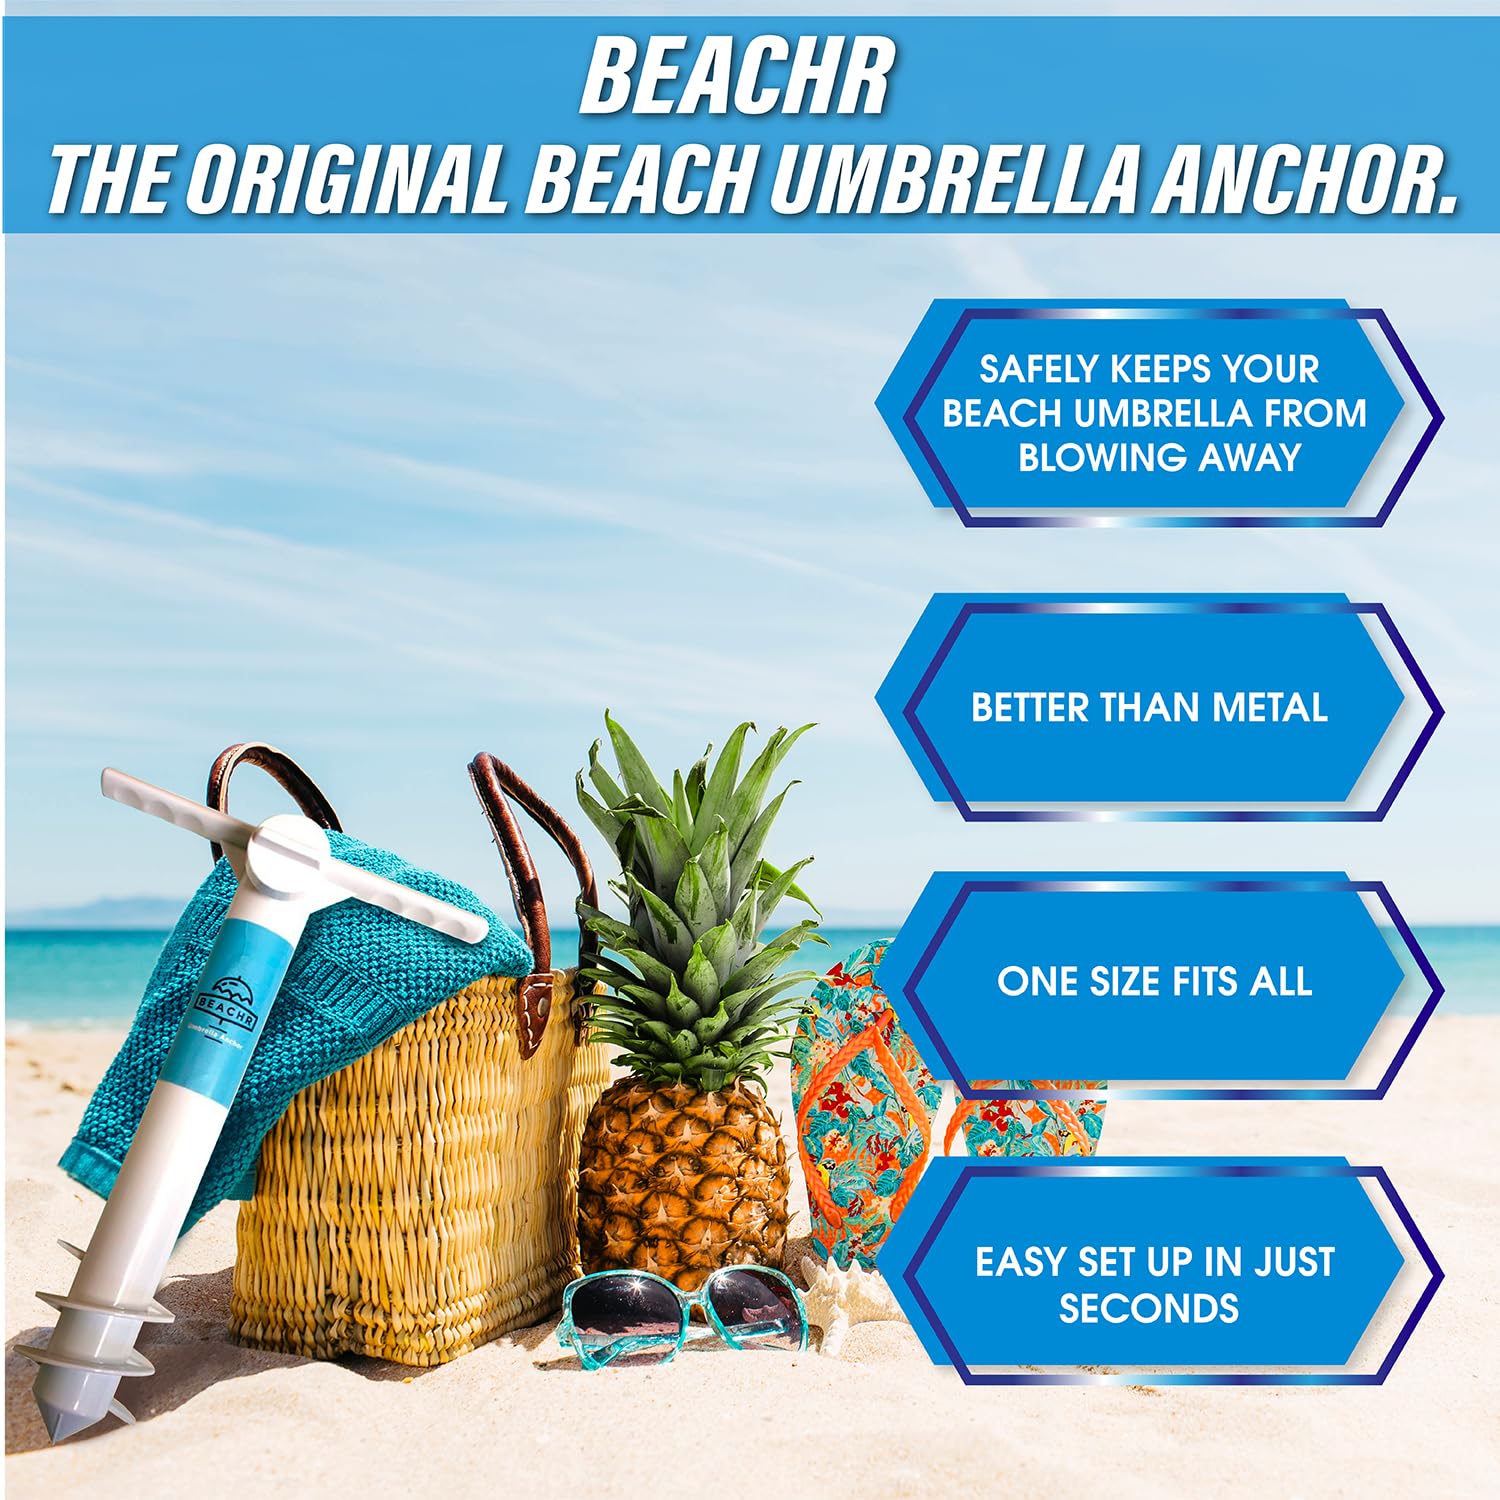 Beachr Beach Umbrella Sand Anchor | Outdoor Umbrella Base with Ground Anchor Screw | Ideal for Sun Protection, Shade, Strong Winds | Universal & One Size Fits All  - Like New